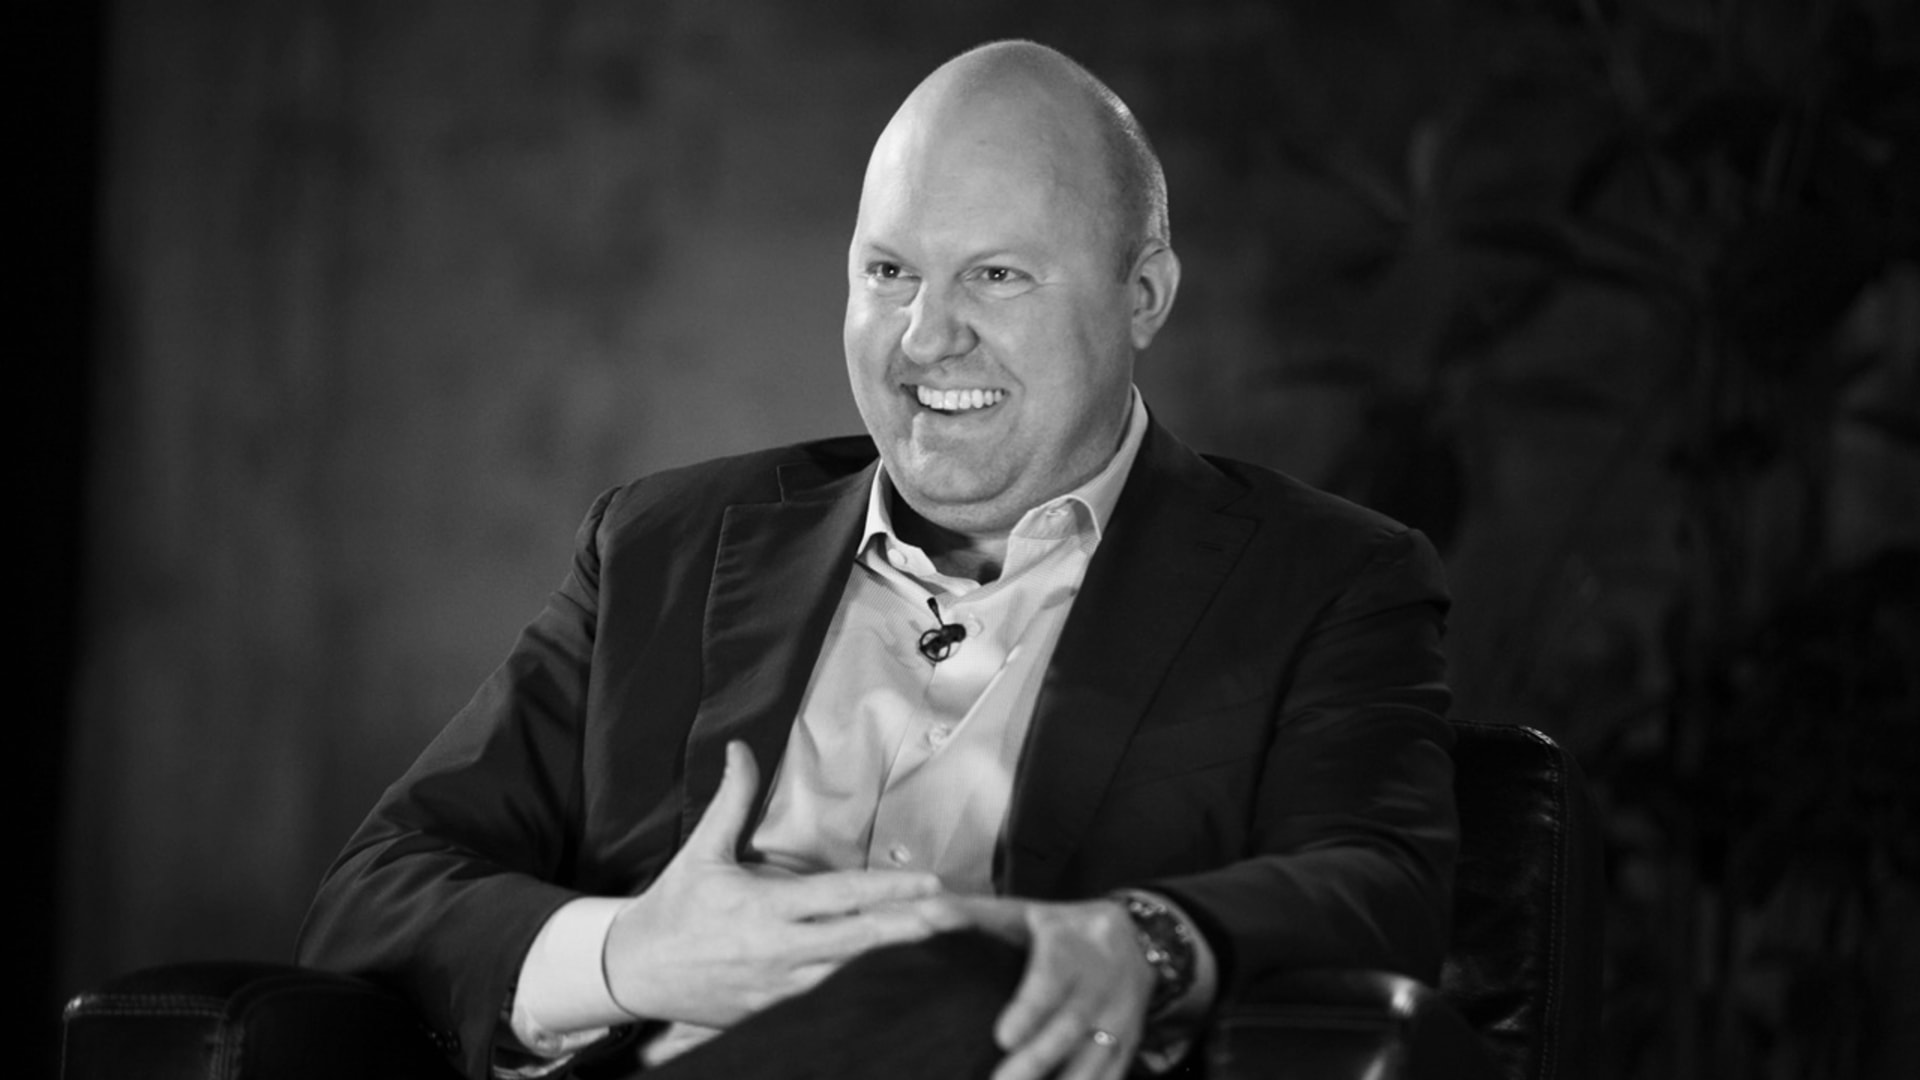 Andreessen Horowitz is done being a venture capital firm